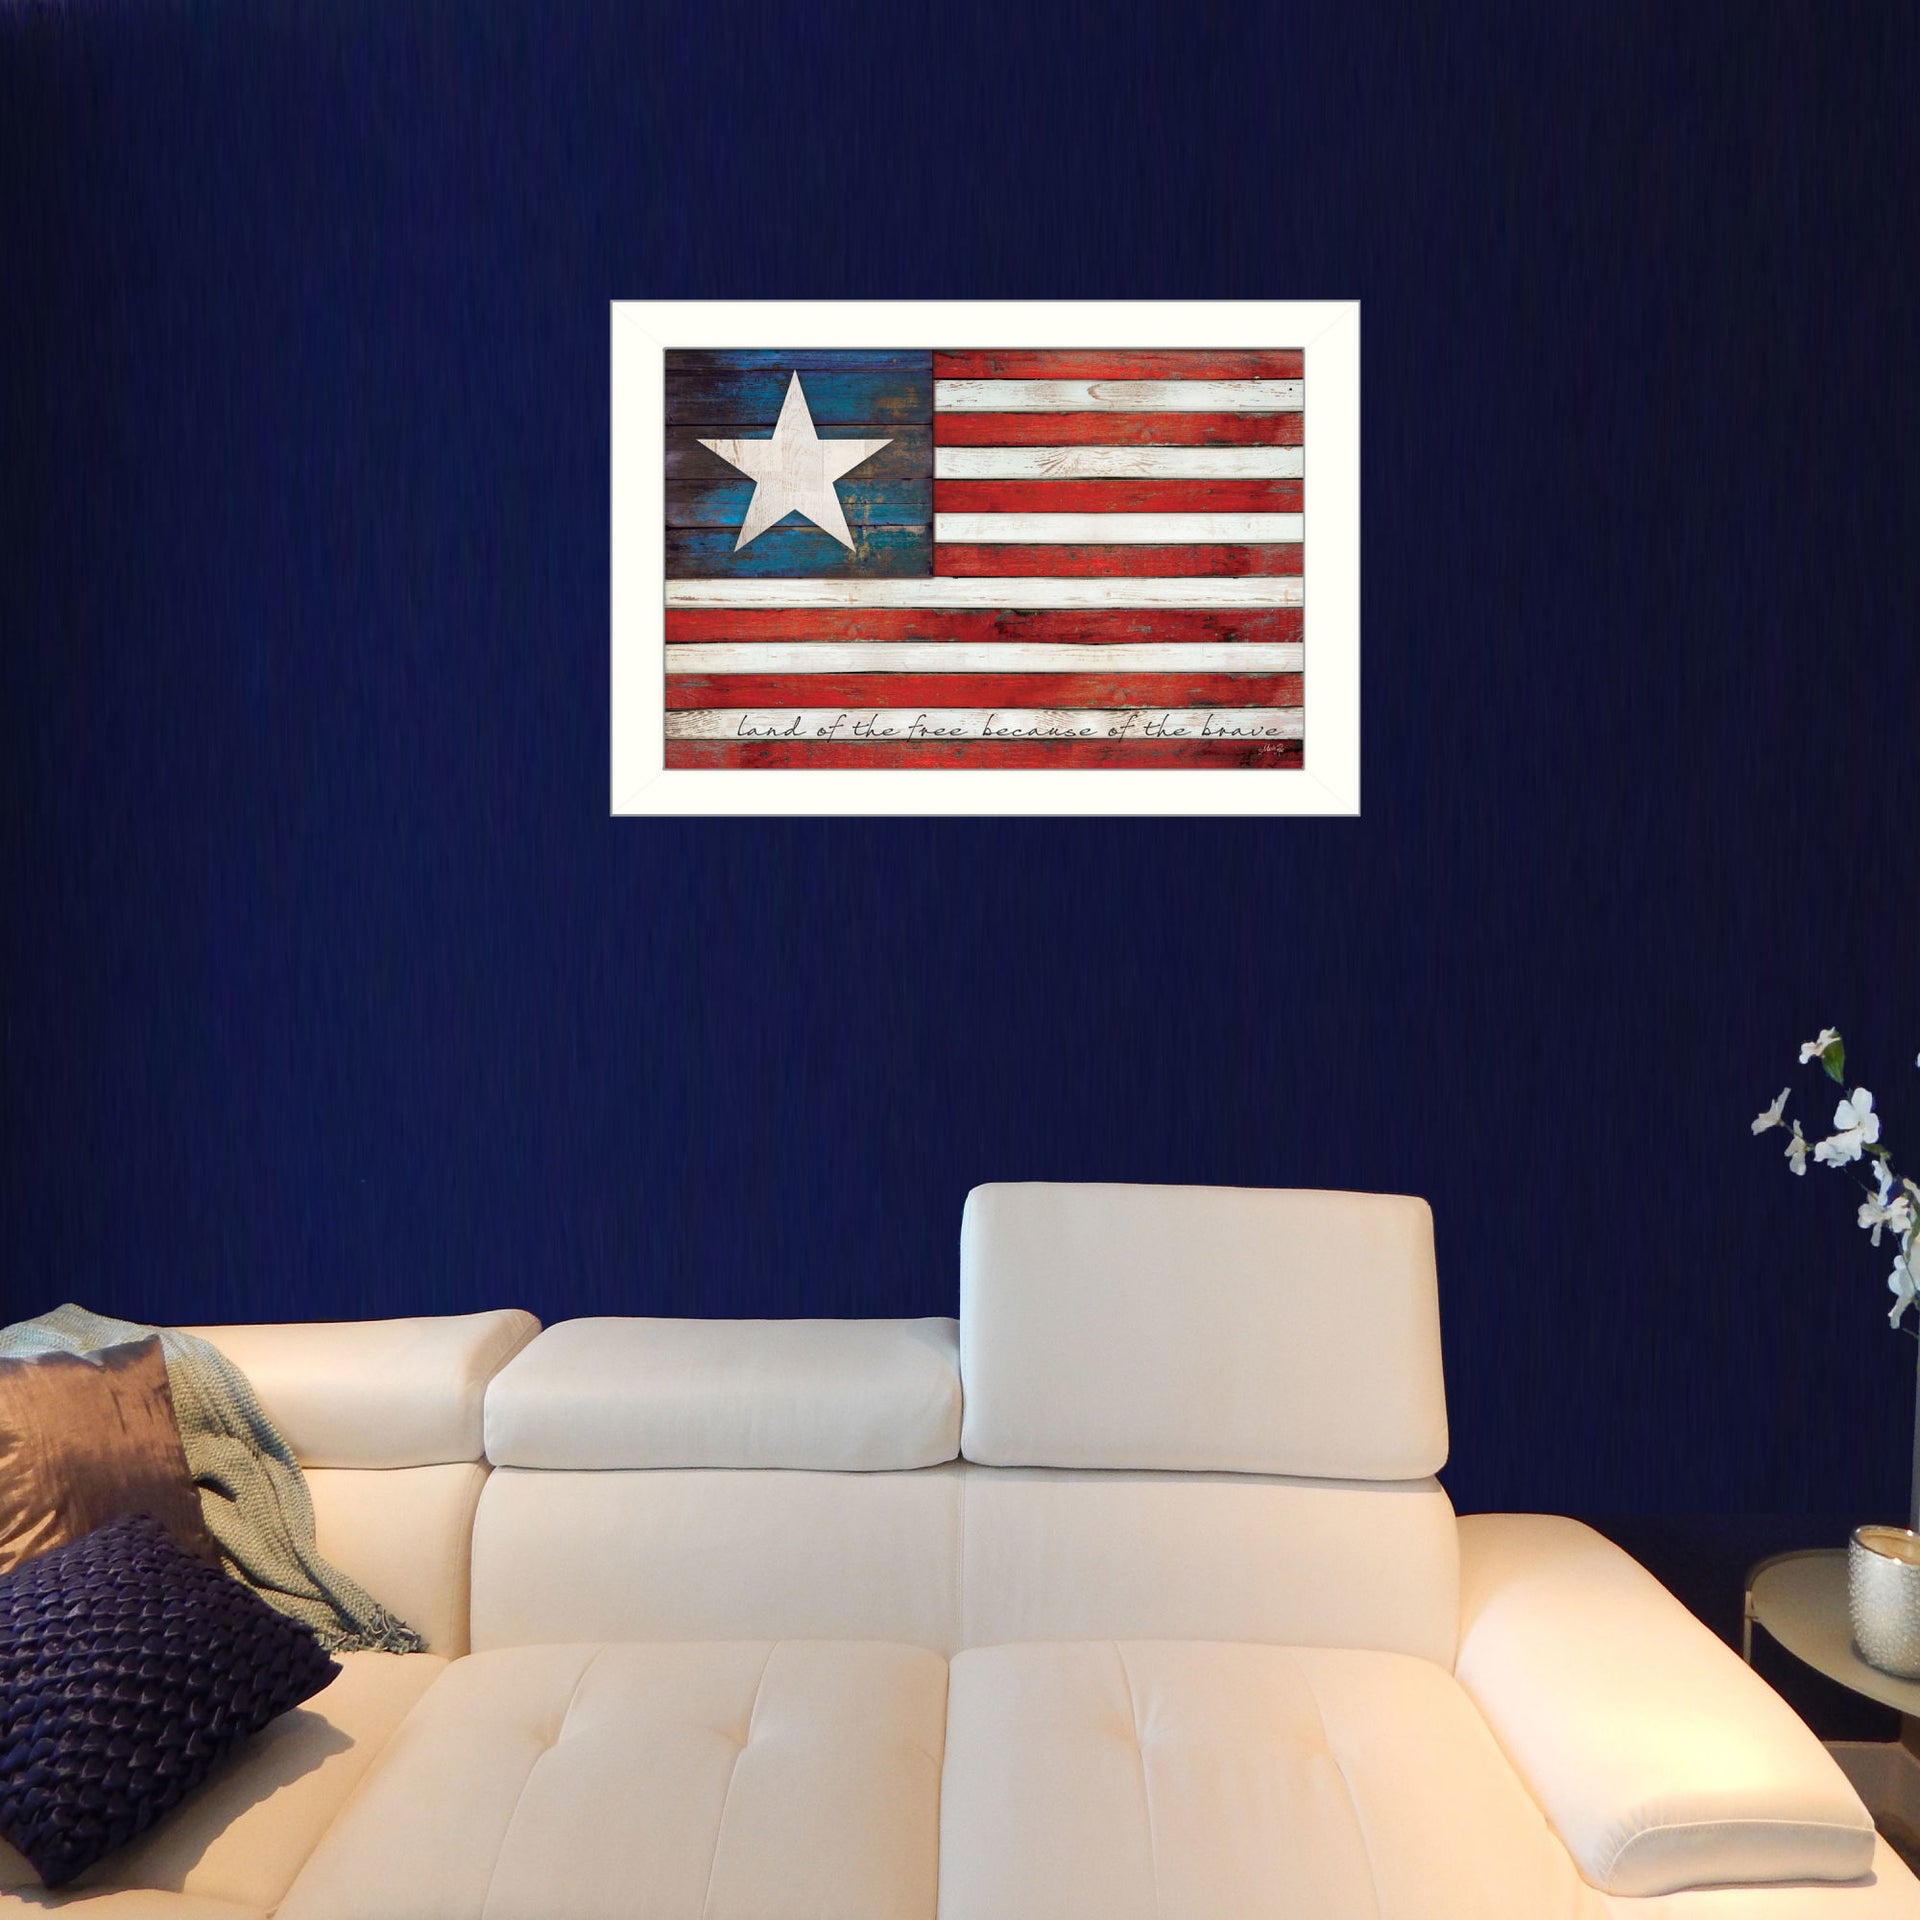 "Land of the Free" By Marla Rae, Printed Wall Art, Ready To Hang Framed Poster, White Frame